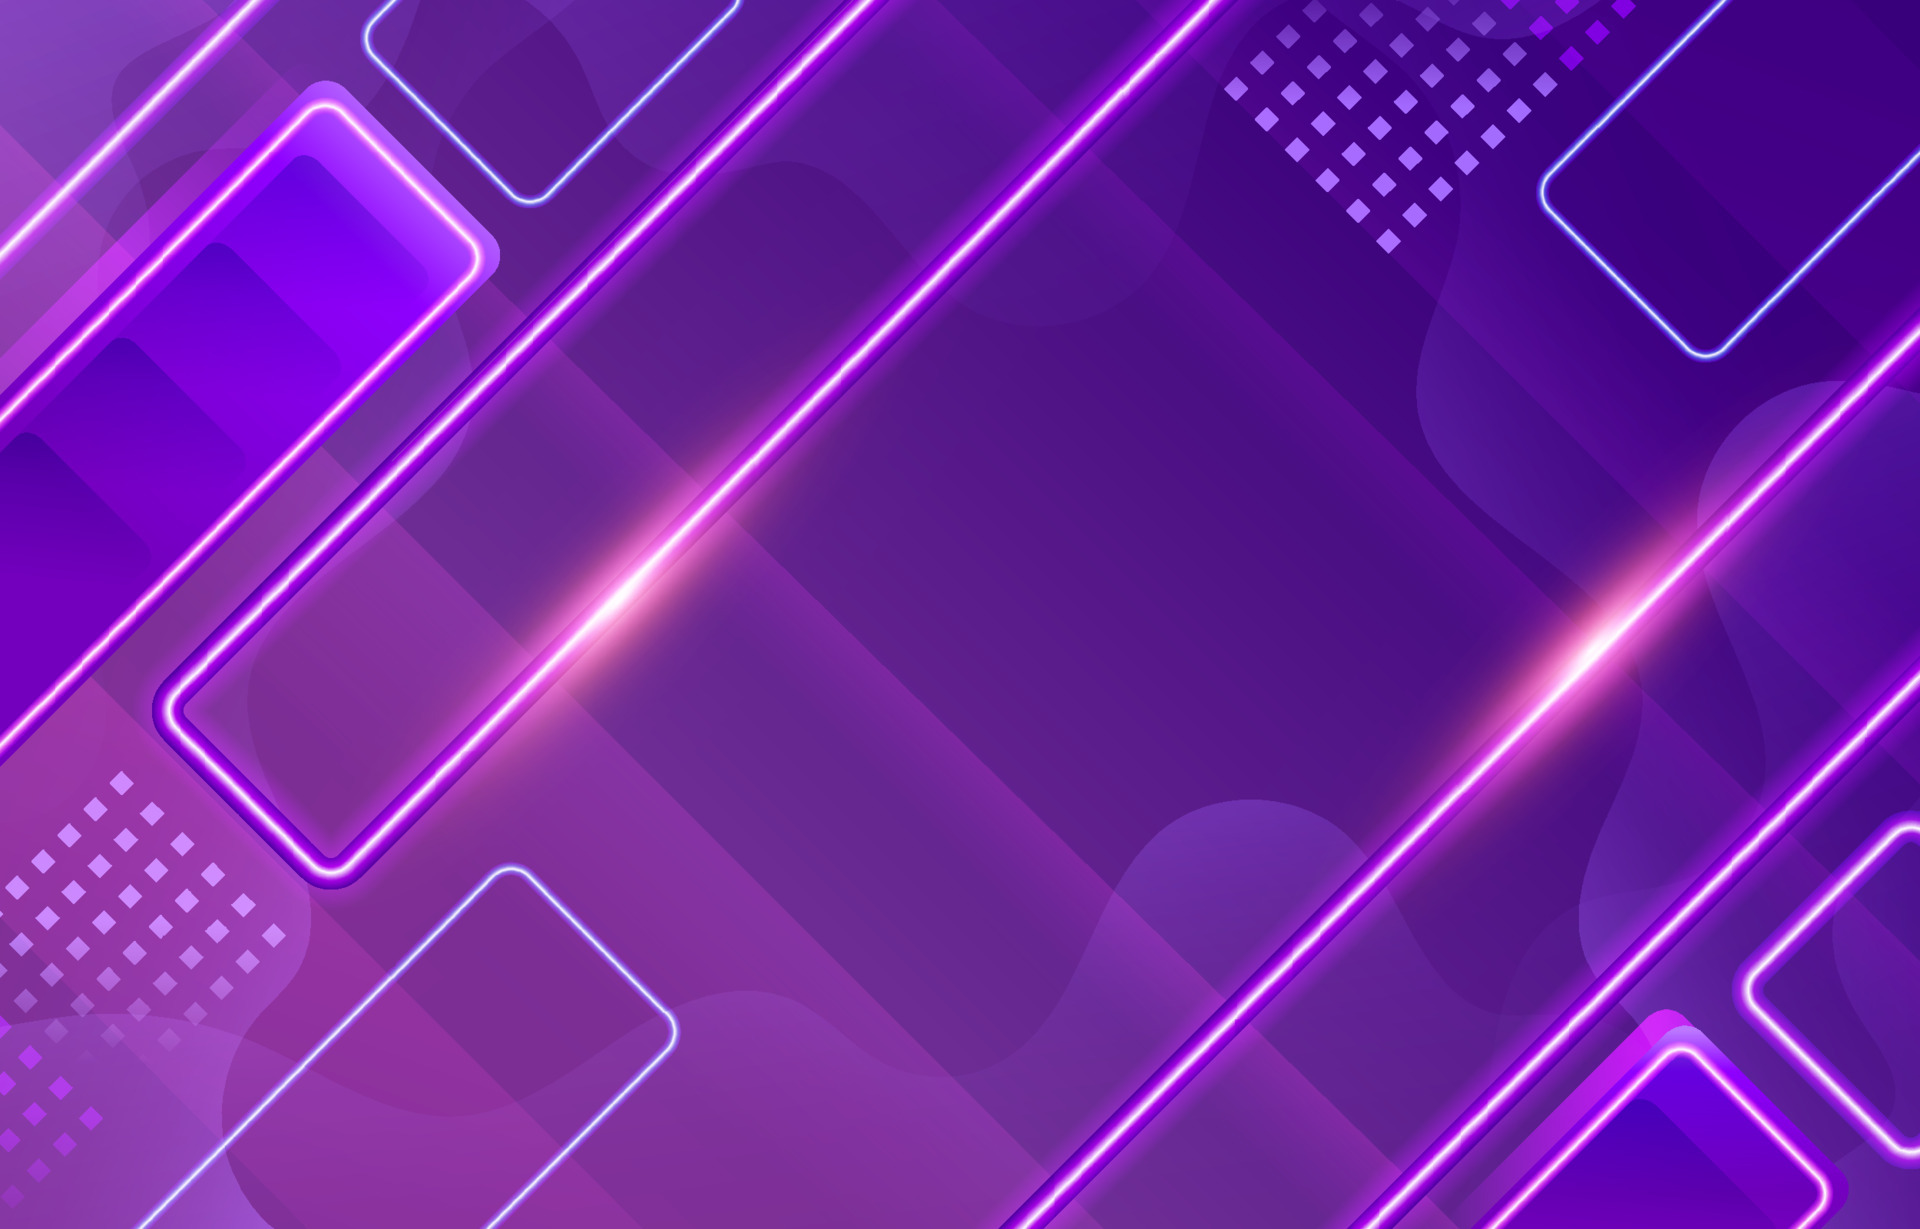 550 Purple Background Pictures  Download Free Images on Unsplash